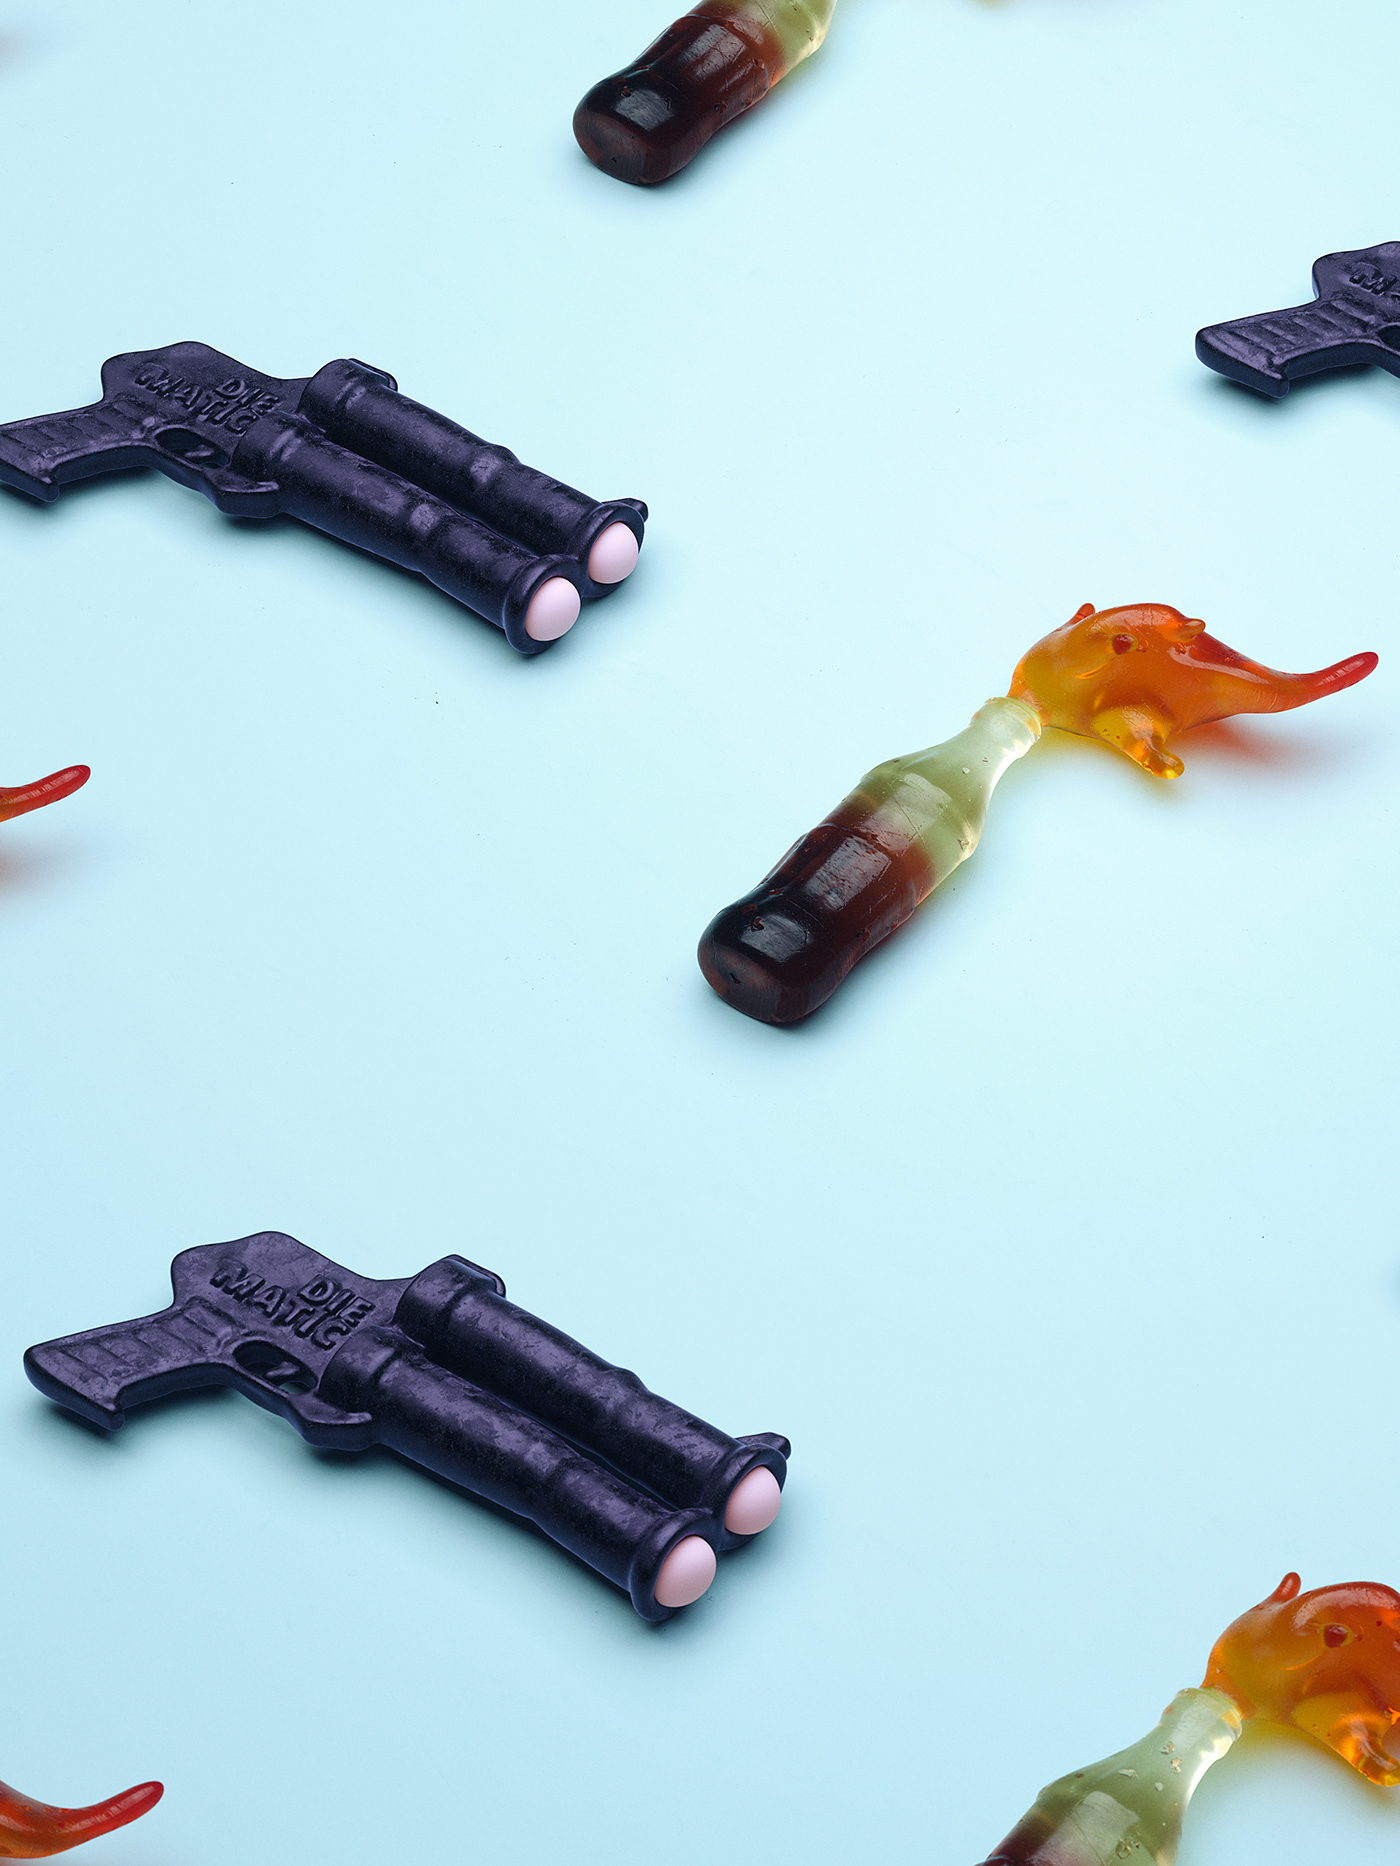 Candy War Candies weapons sugar #interaction #motion #graphicDesign #illustration #photography #DigitalArt